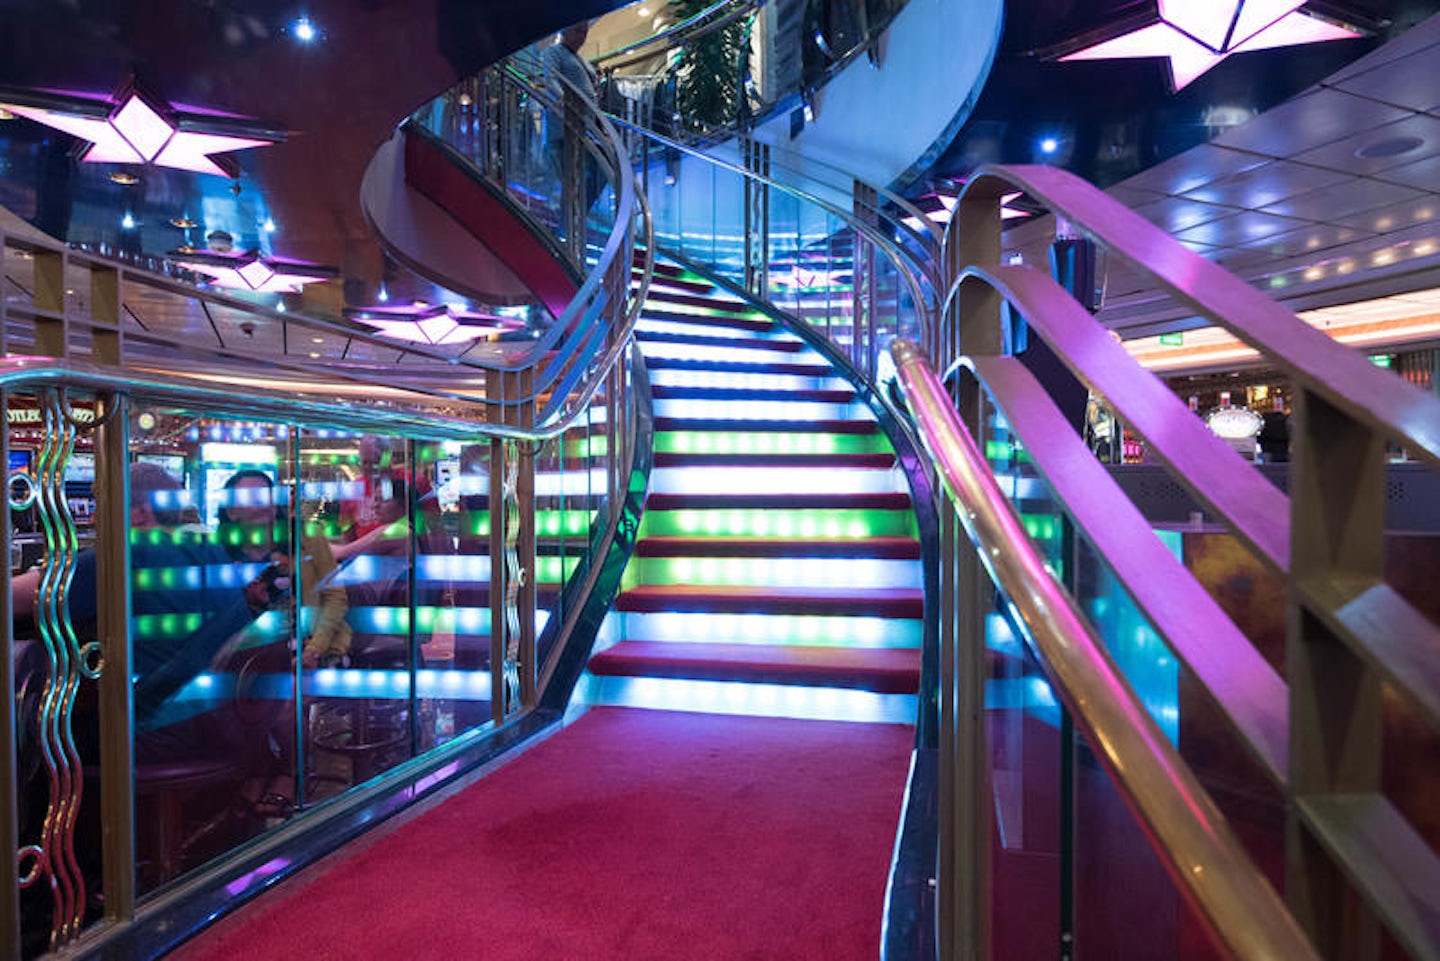 Stairs on Freedom of the Seas